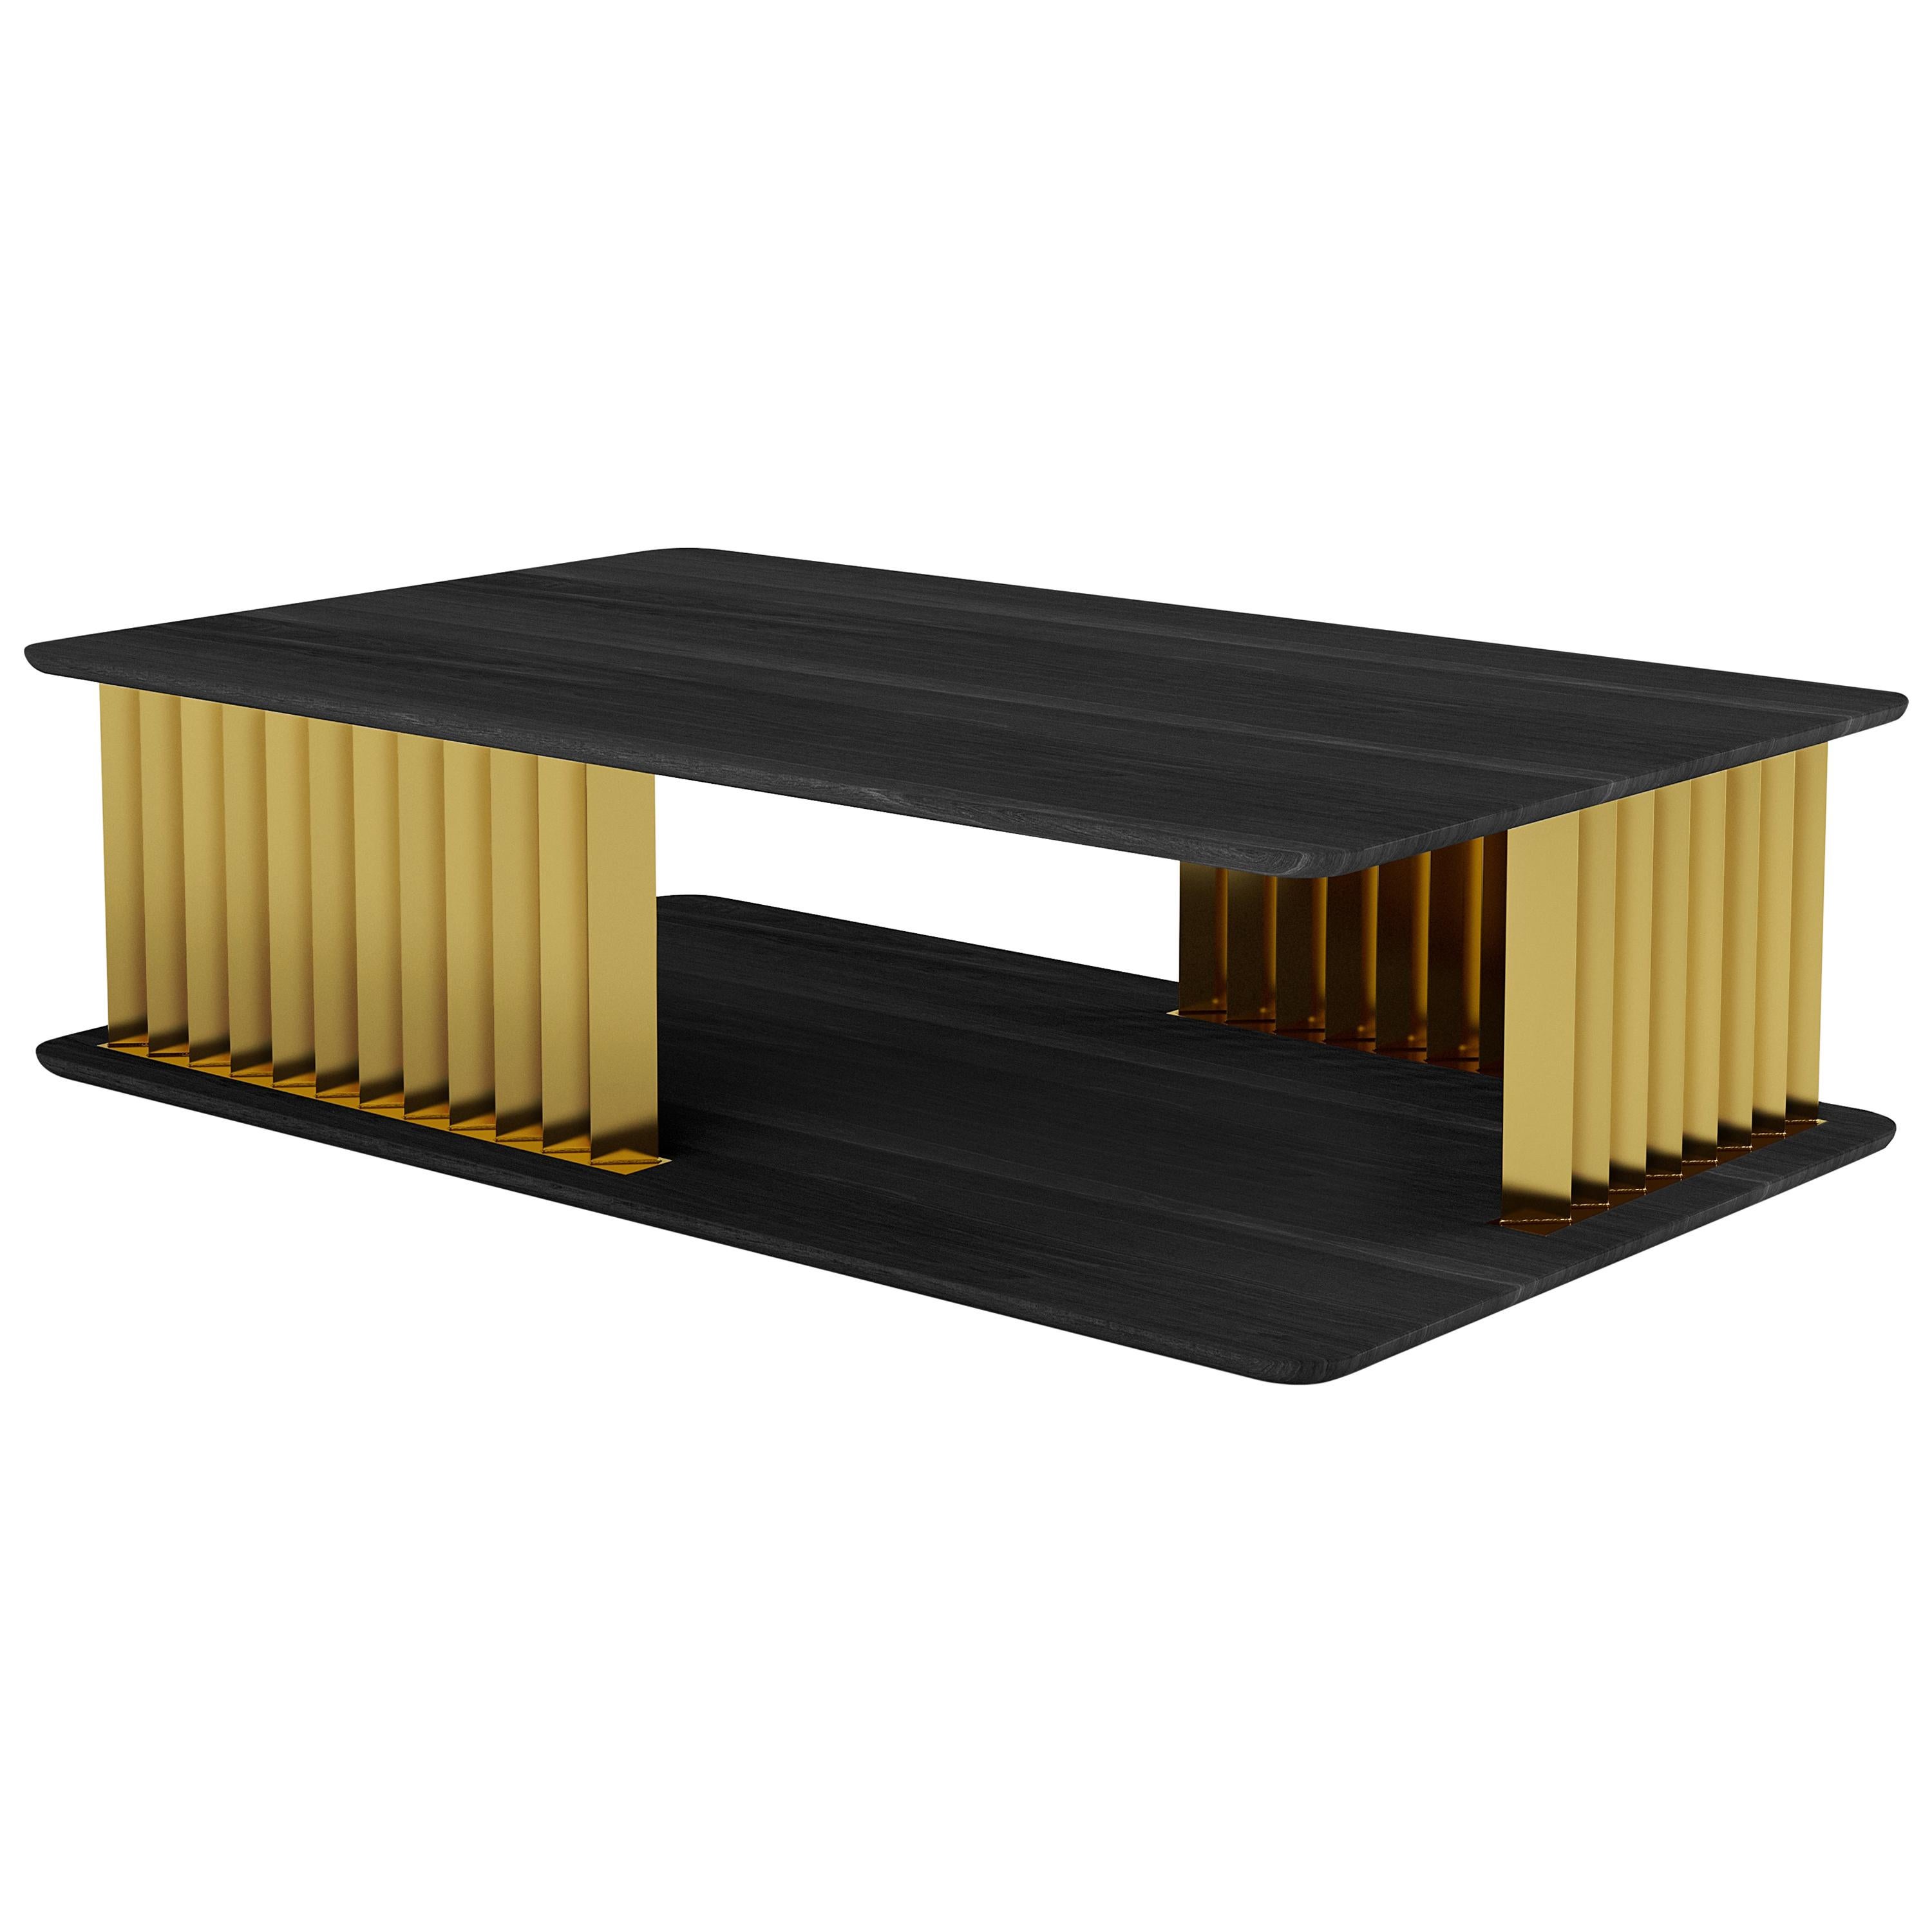 Plateau Rectangular Coffee Table in Black Wood and Brass Structure by NONO